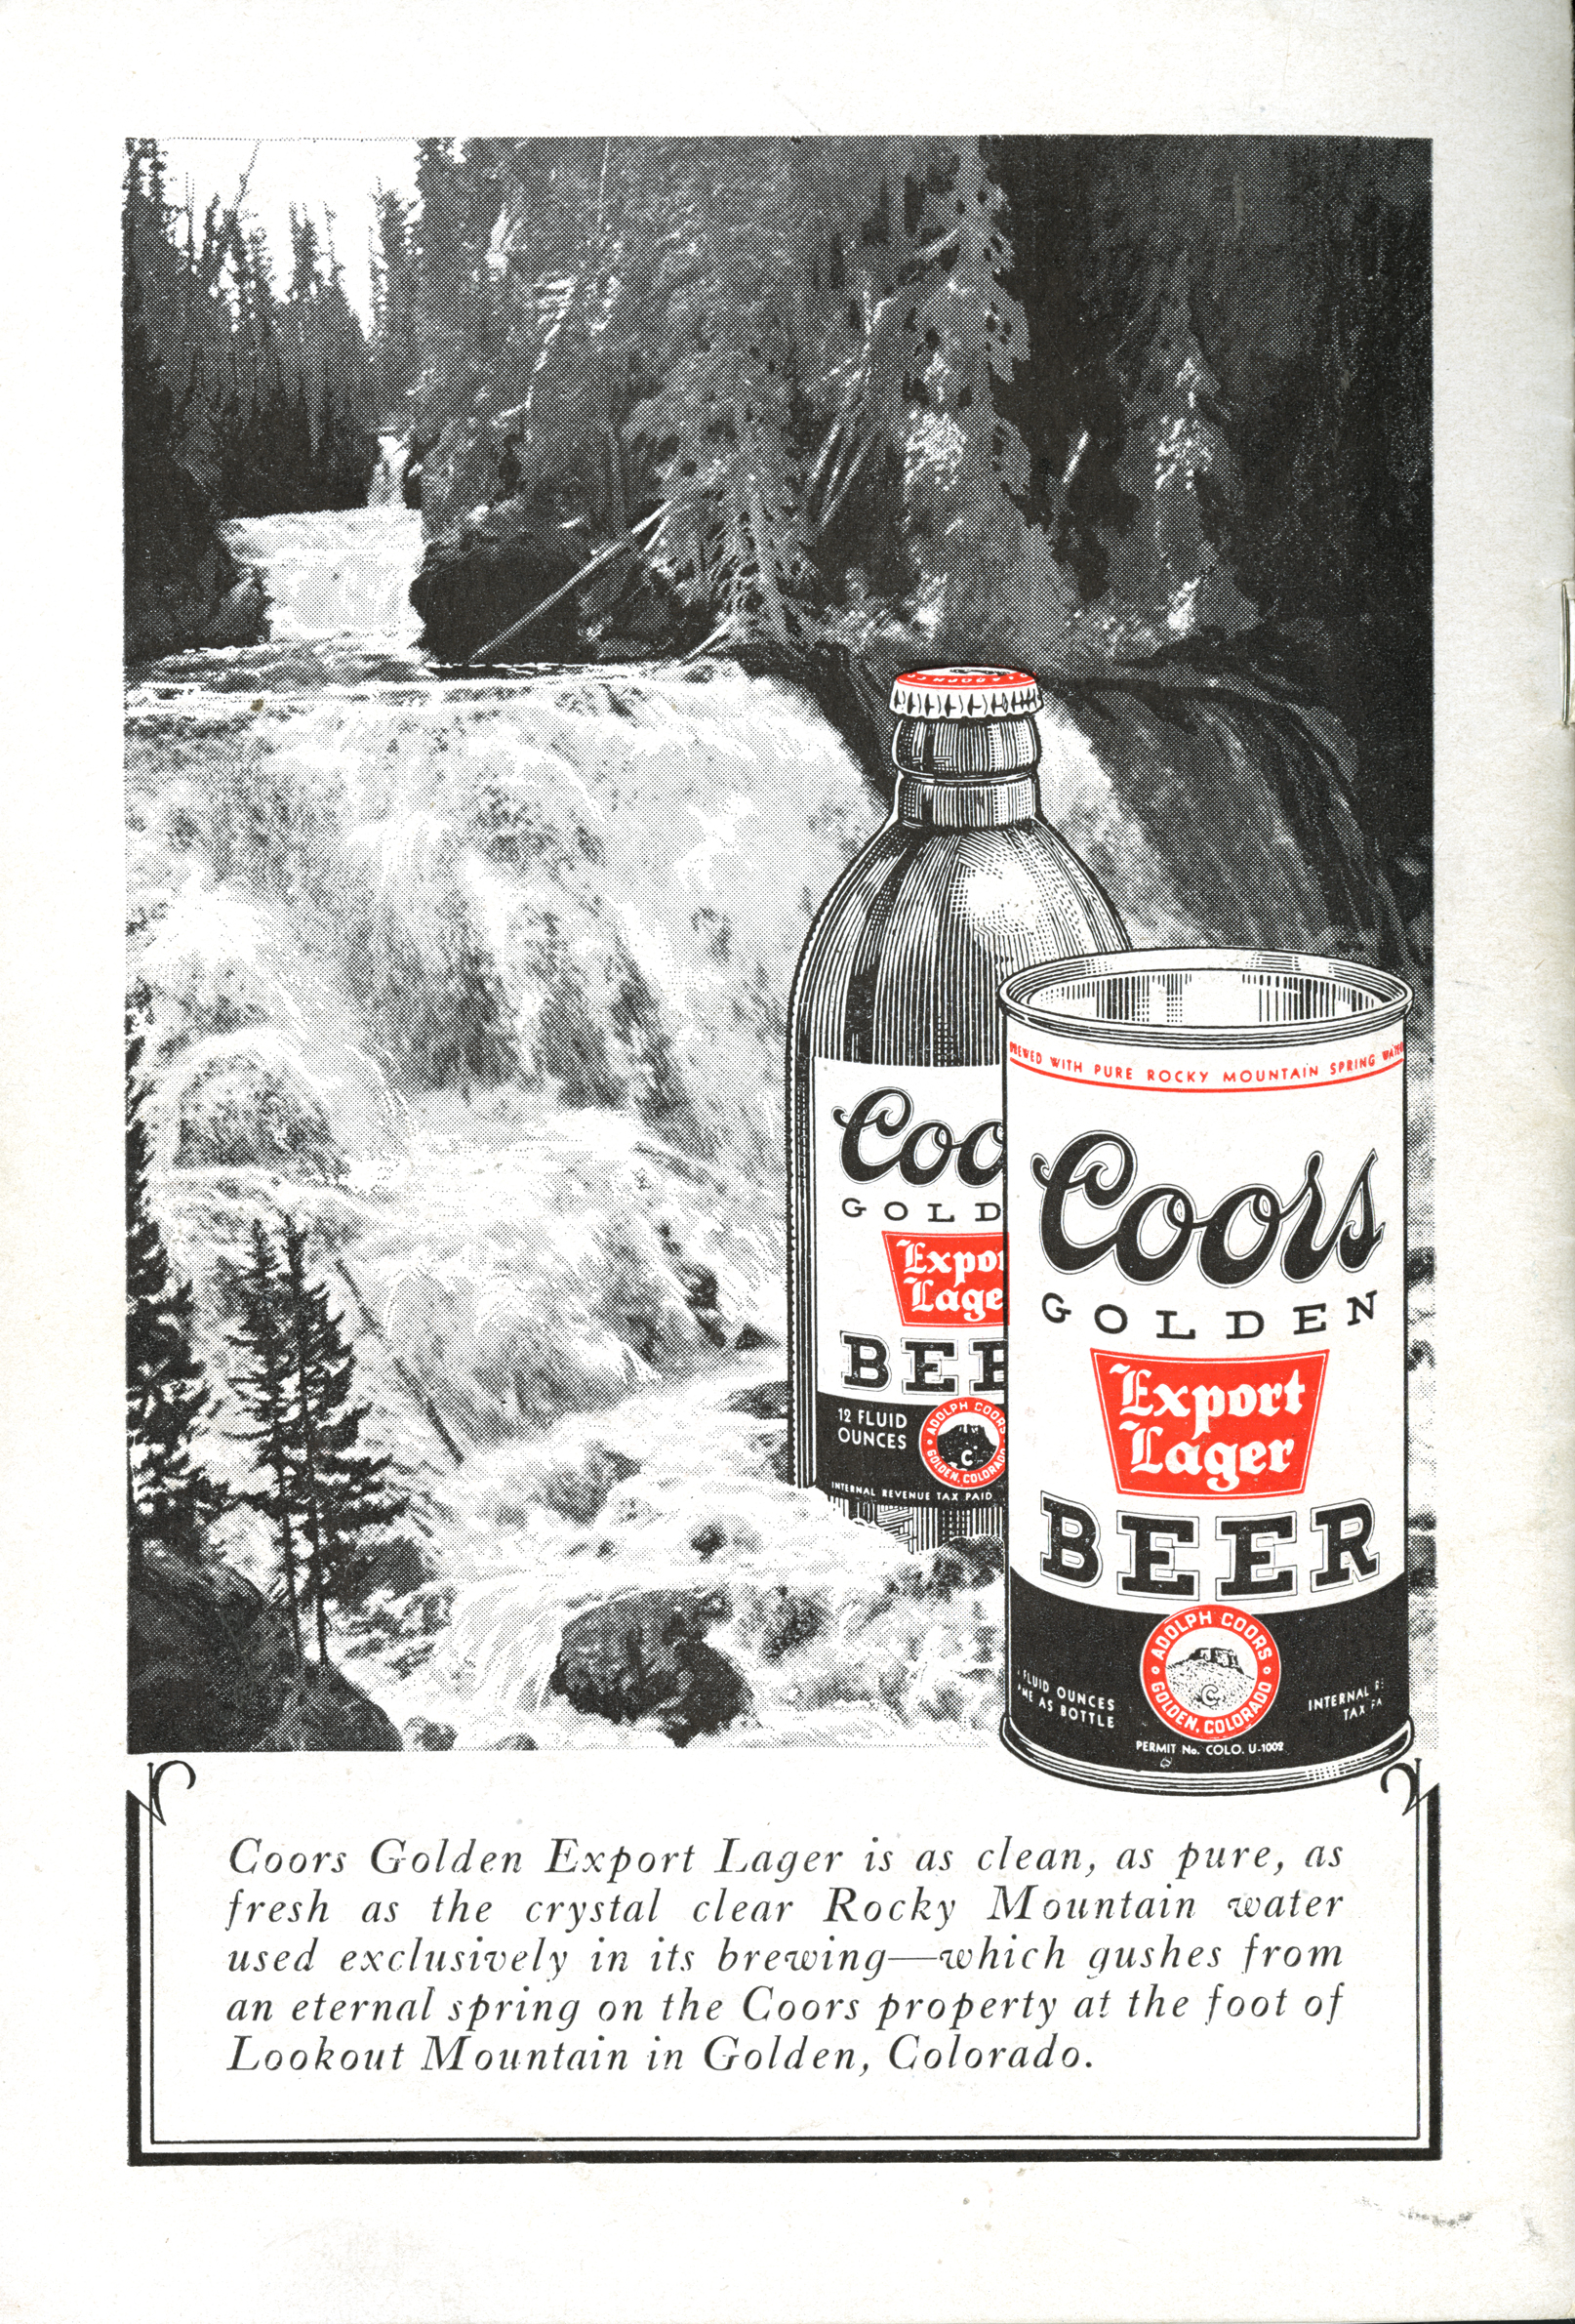 A 1936 ad reading "Coors Golden Export Lager is as clean, as pure, as fresh as the crystal clear Rocky Mountain Water used exclusively in its brewing, which gushes from an eternal spring on the Coors property at the foot of Lookout Mountain in Golden, Colorado."